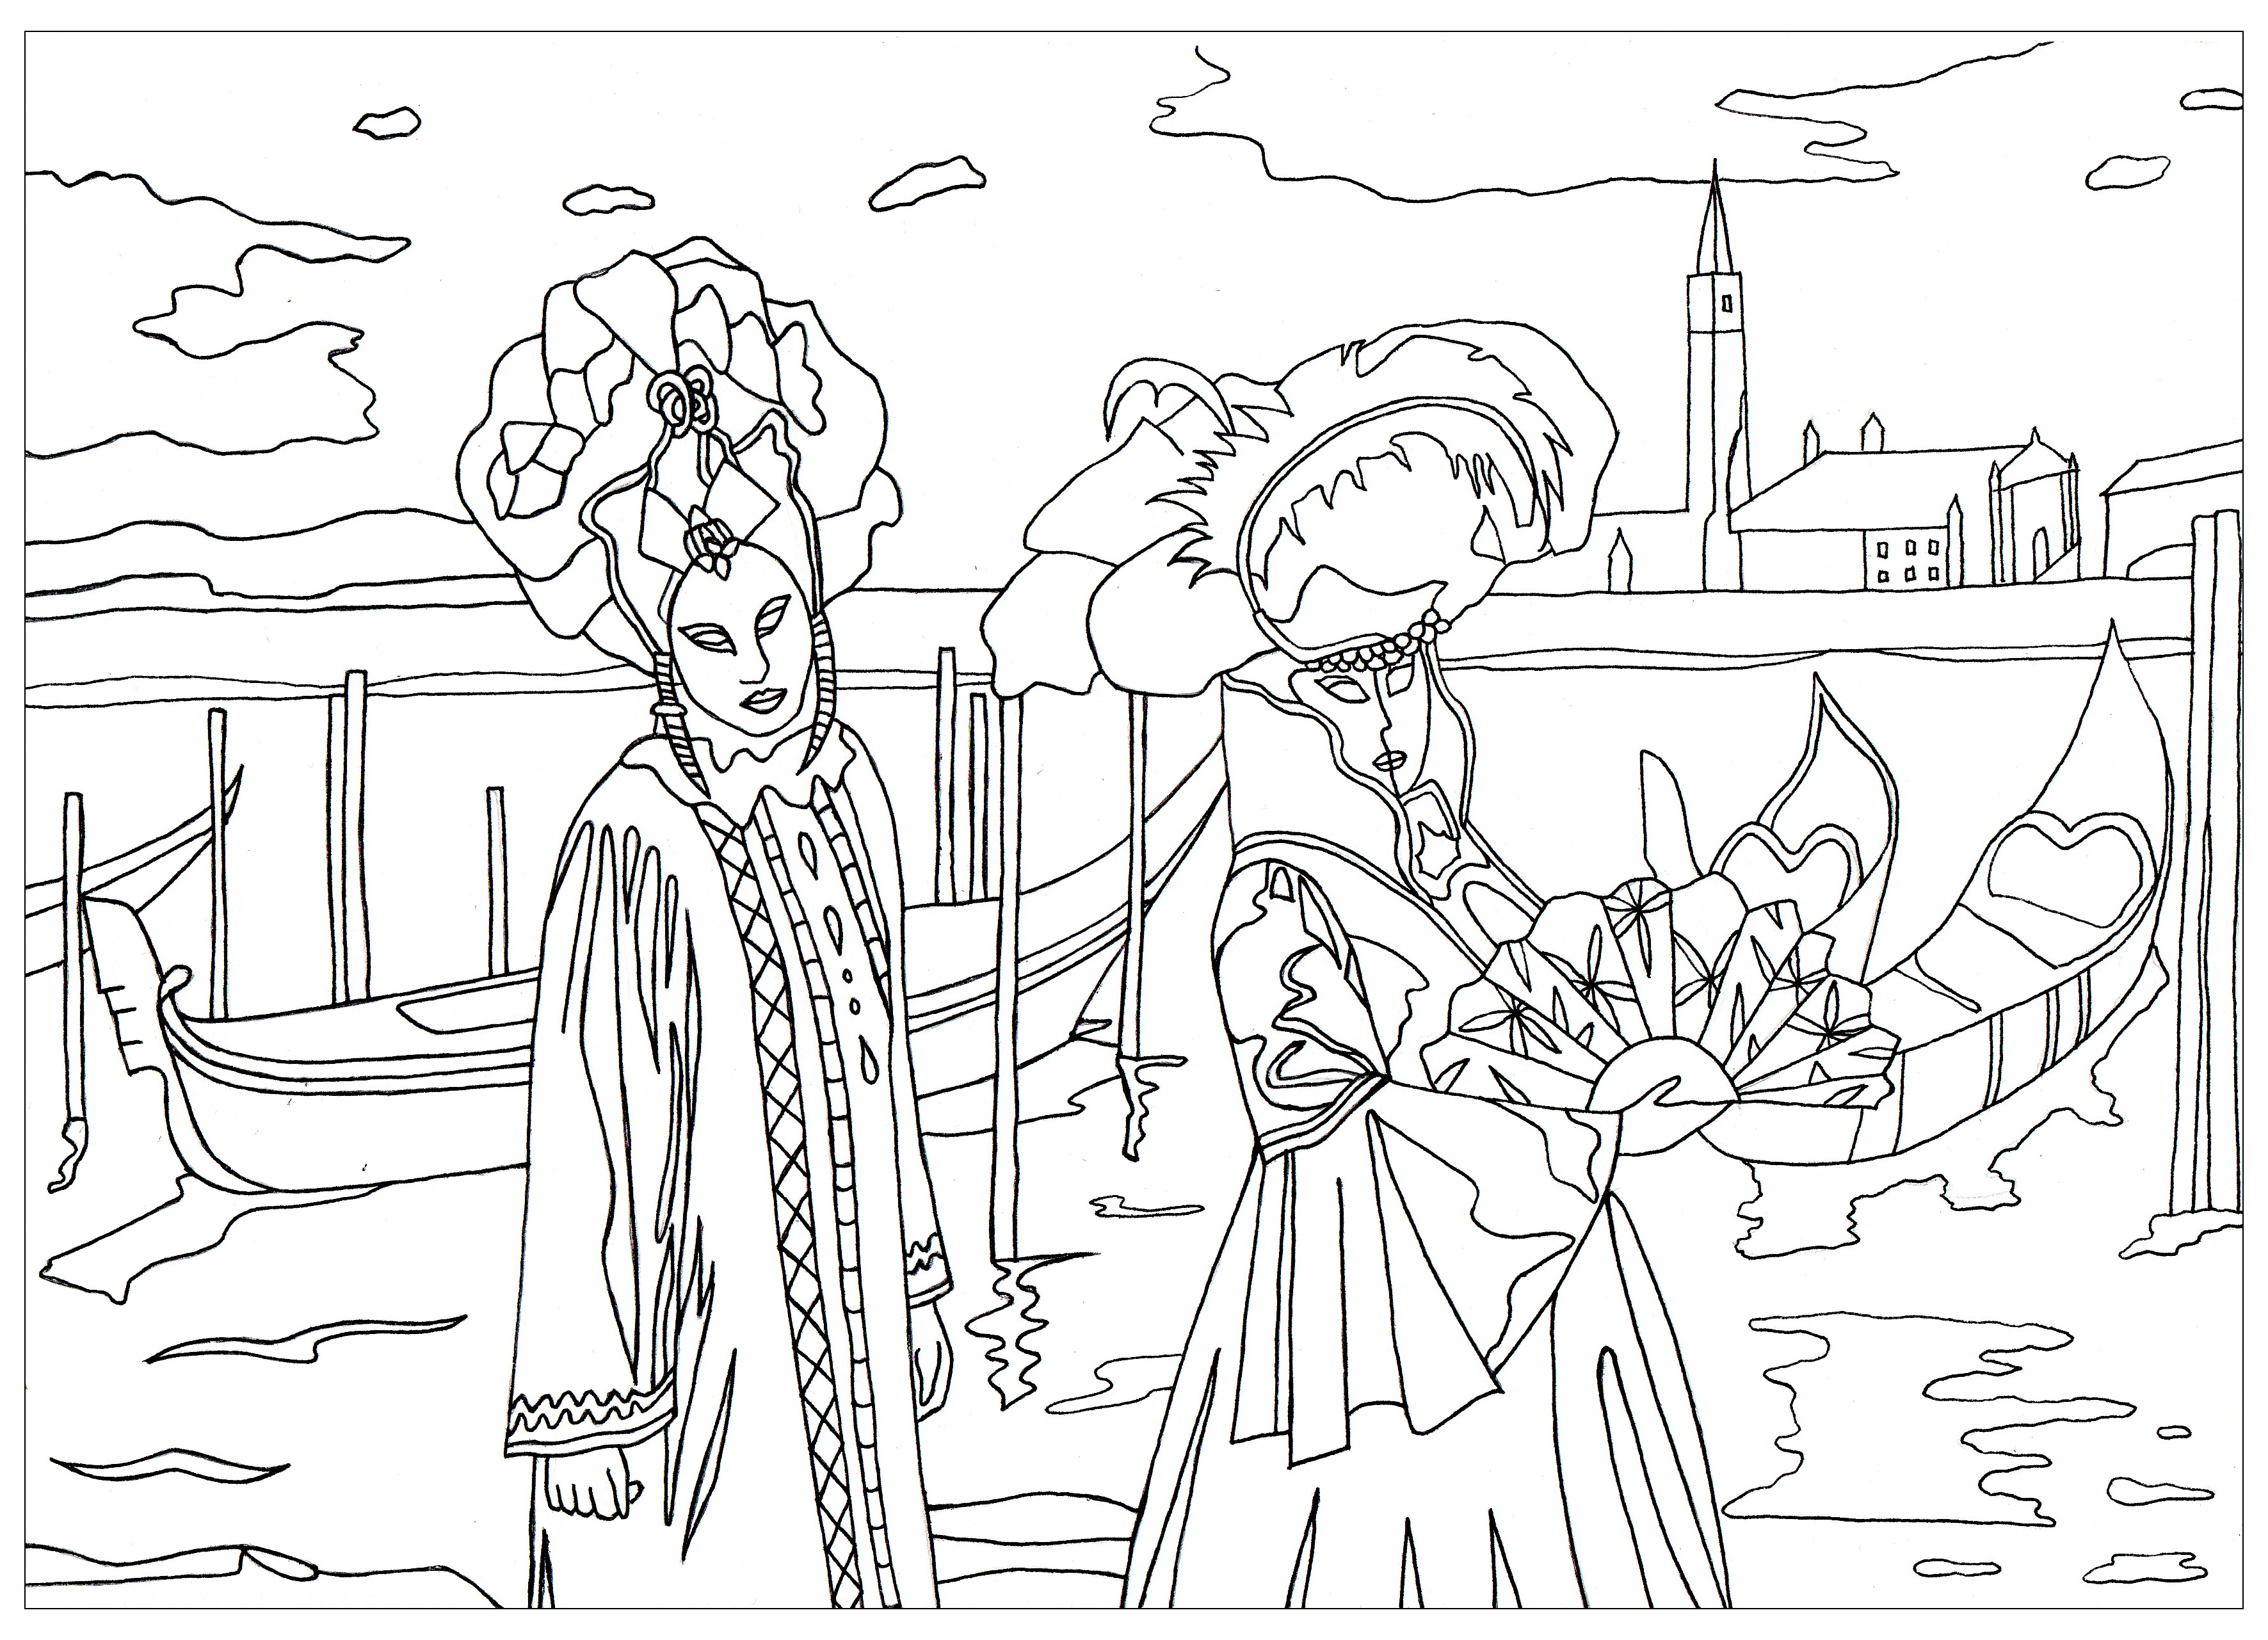 'Venice Carnival', exclusive coloring page, Artist : Marion C